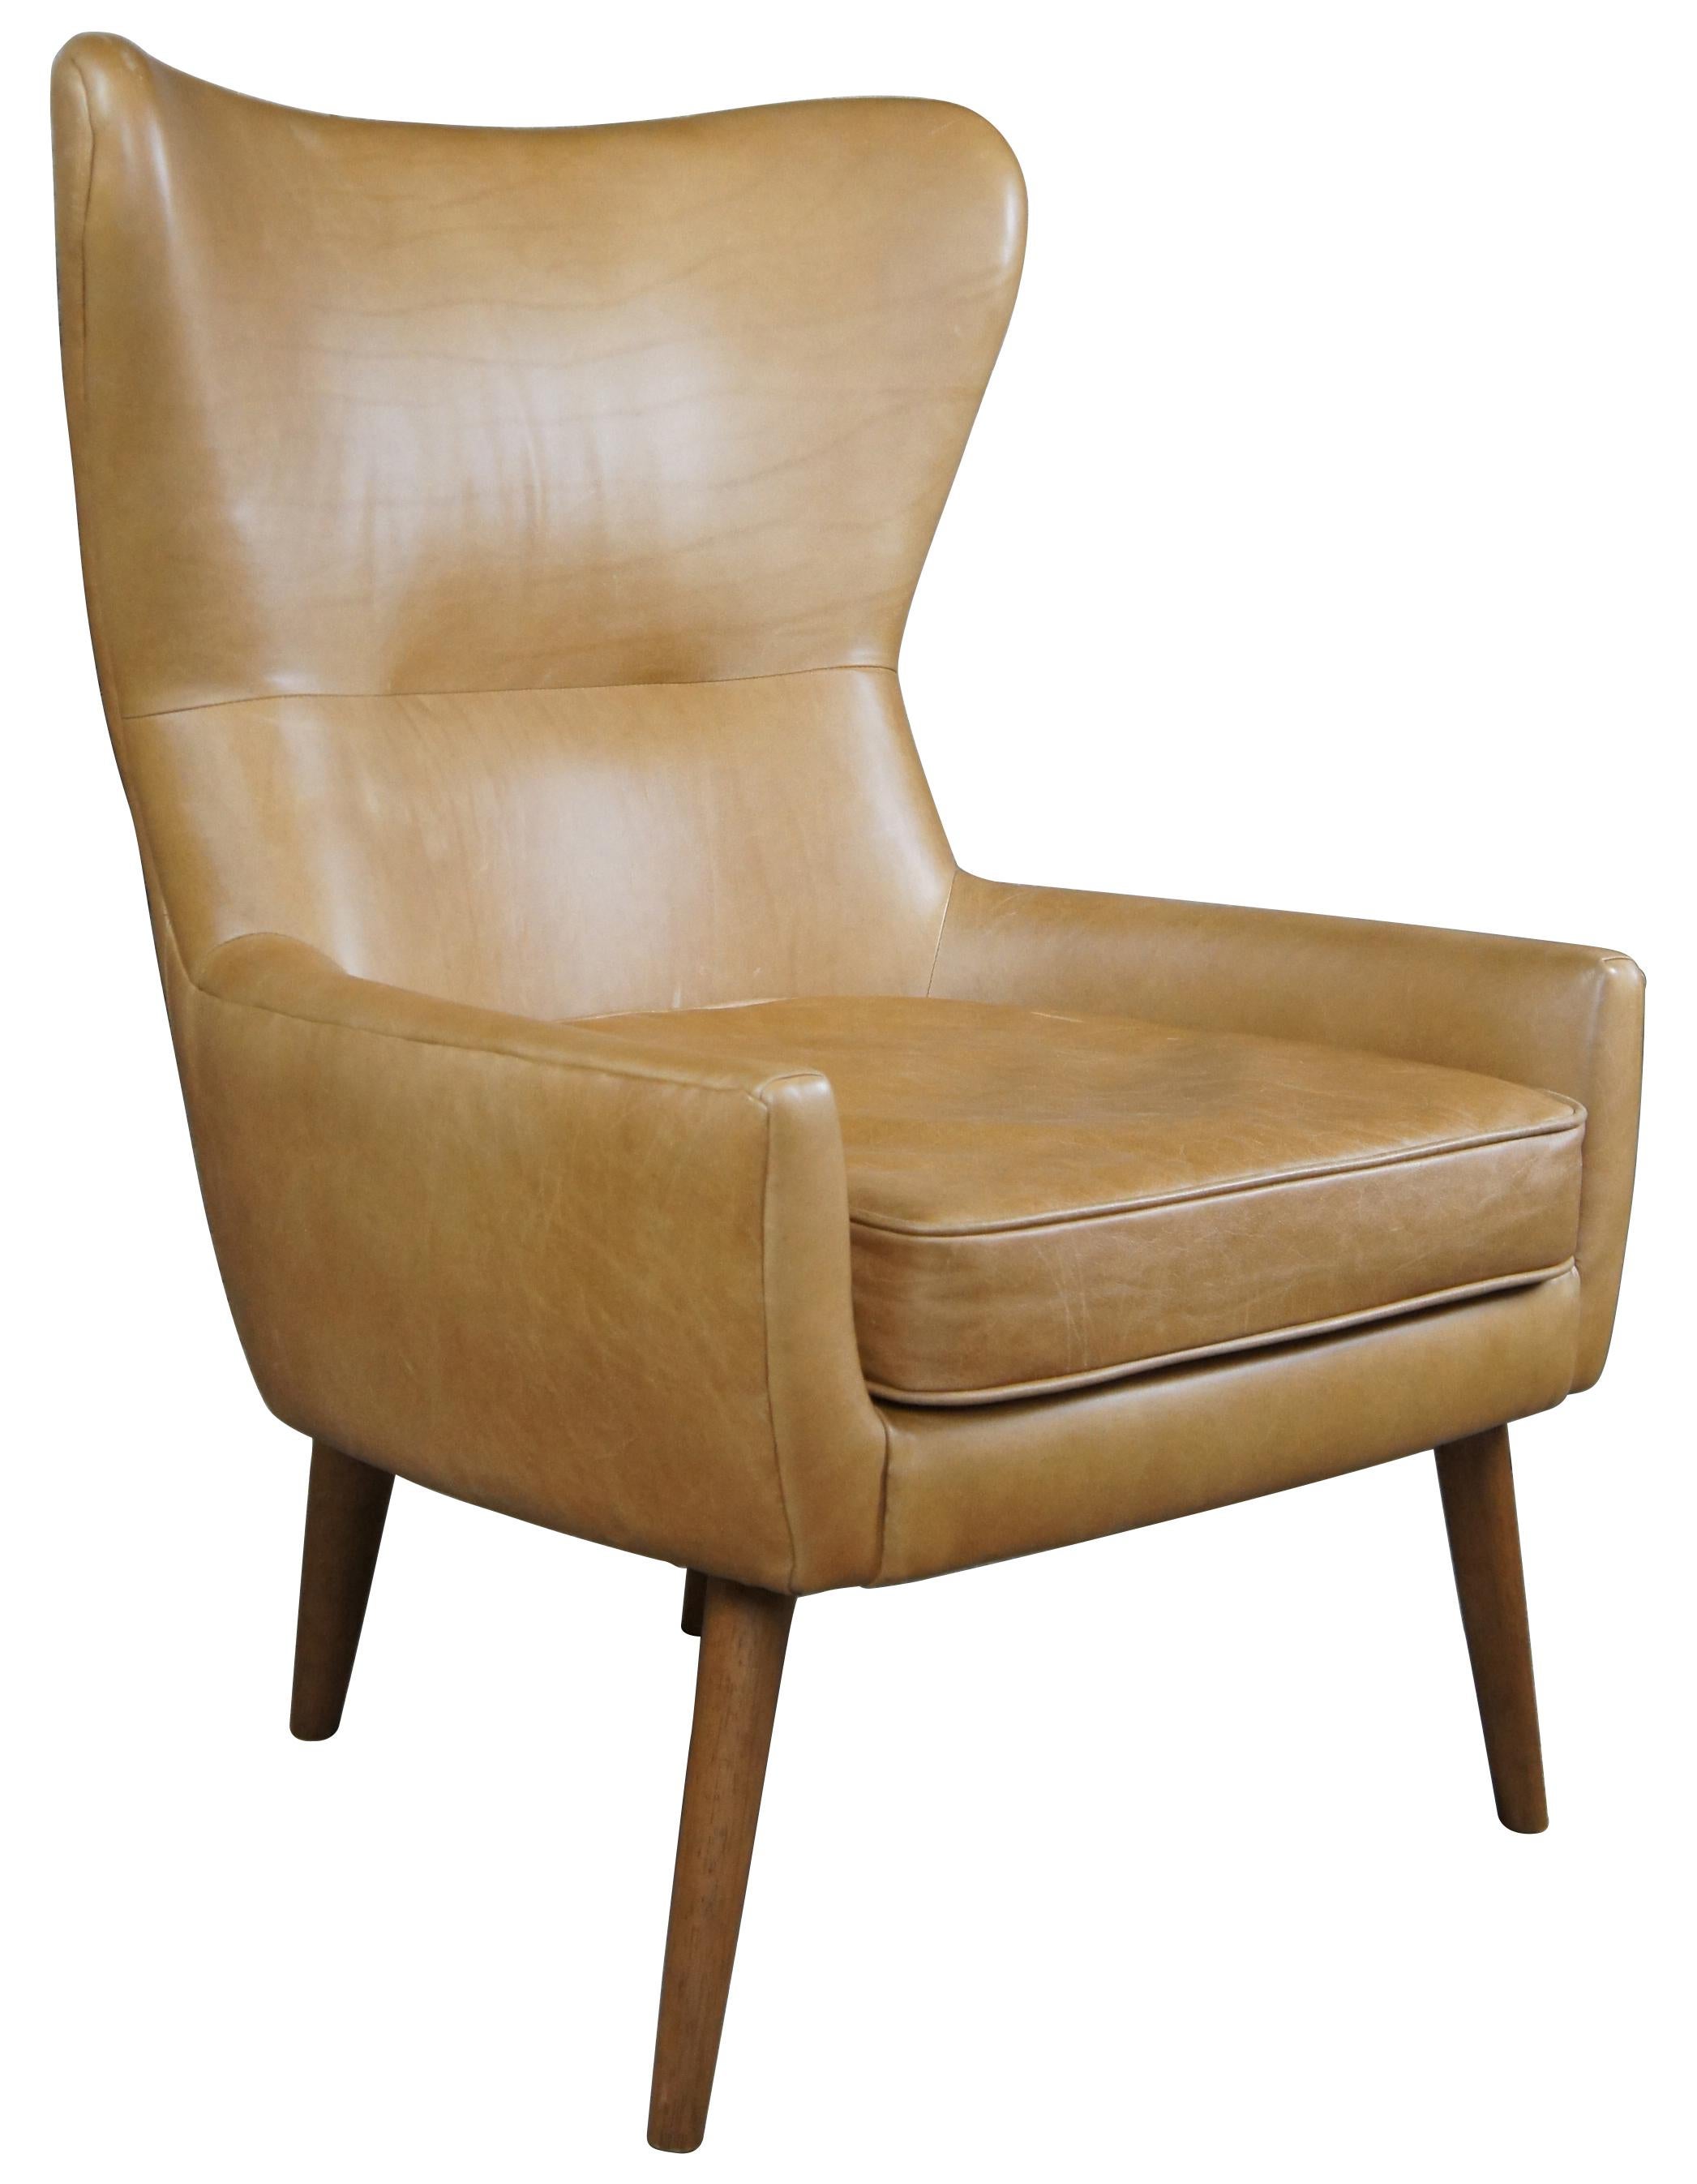 Erik leather chair is a Scandinavian-inspired take on the classic wingback, with a gently curved shape that invites you to sink in. Upholsteres in Burnt Sienna leather with dark oak finished legs. 
 